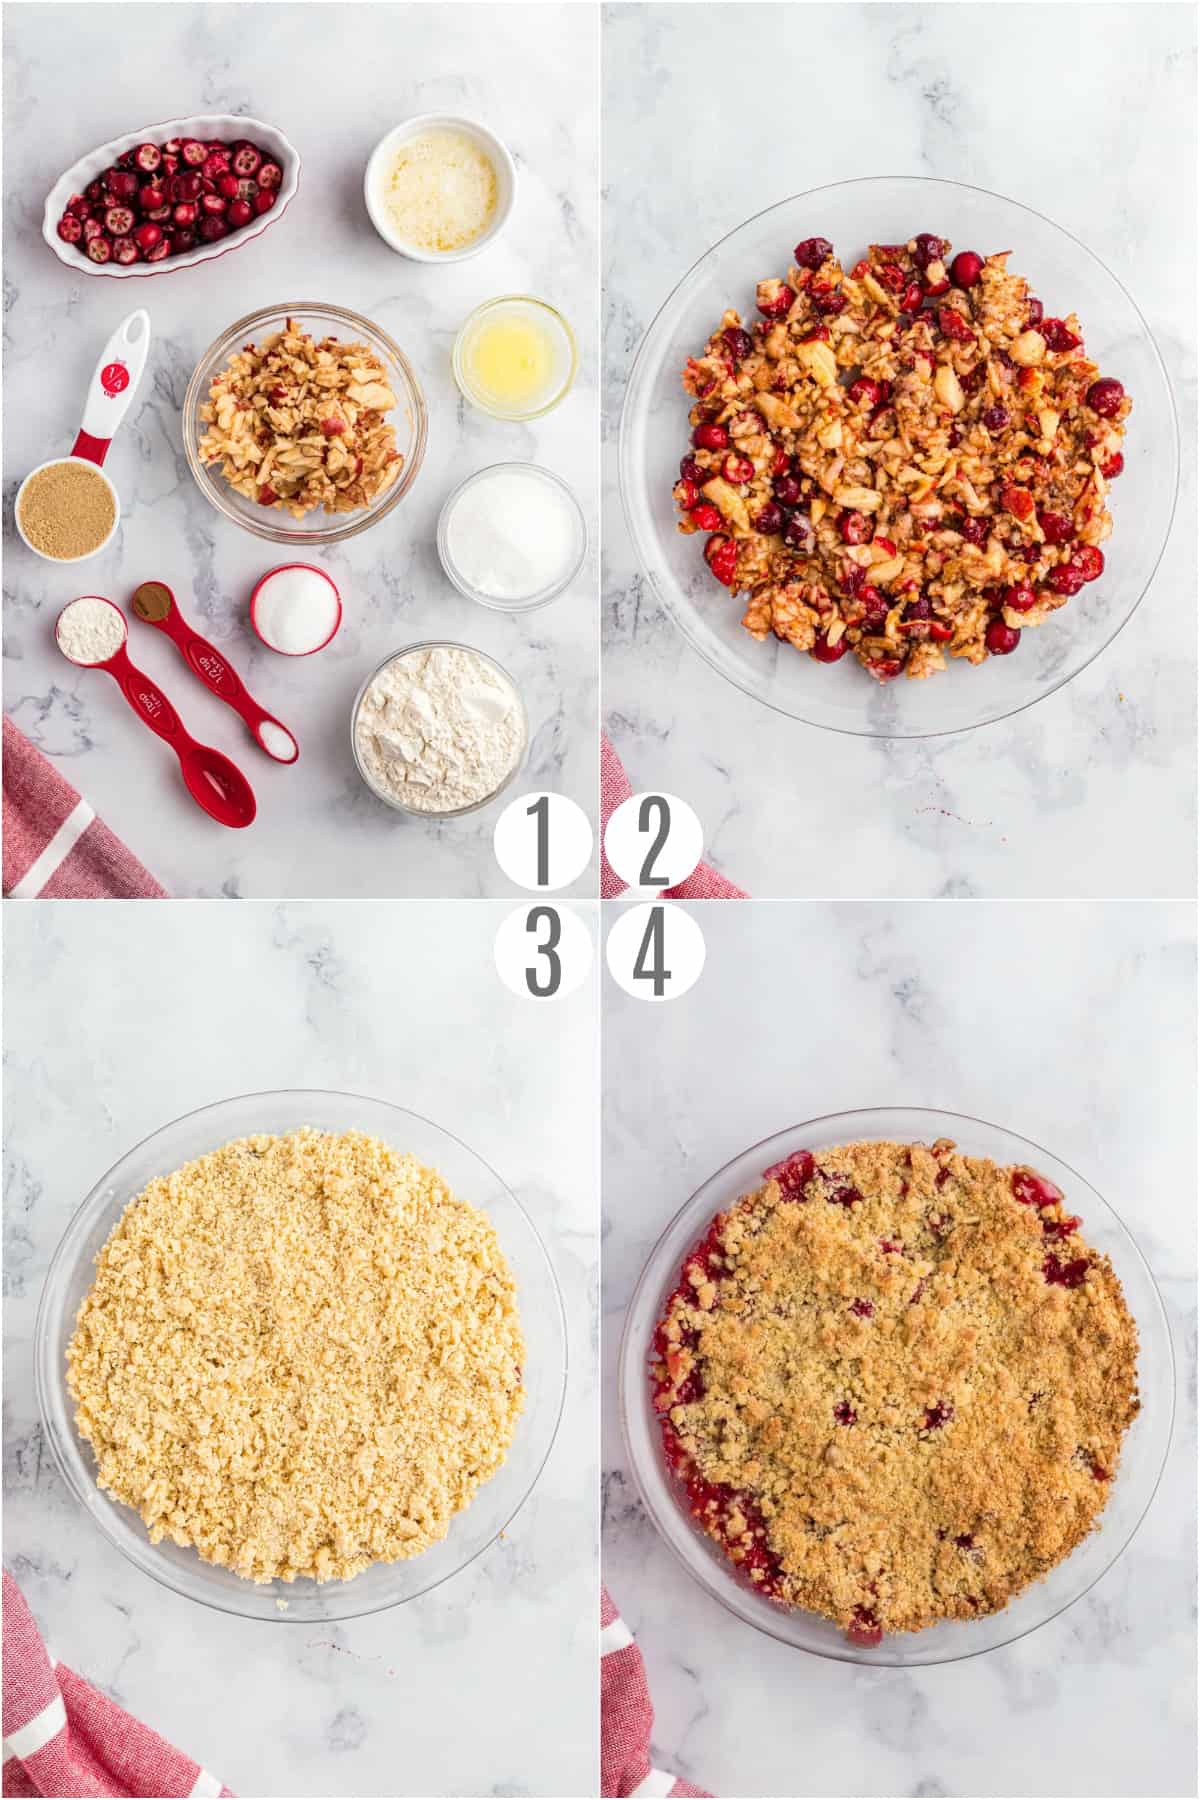 Step by step photos showing how to make apple cranberry crumble.